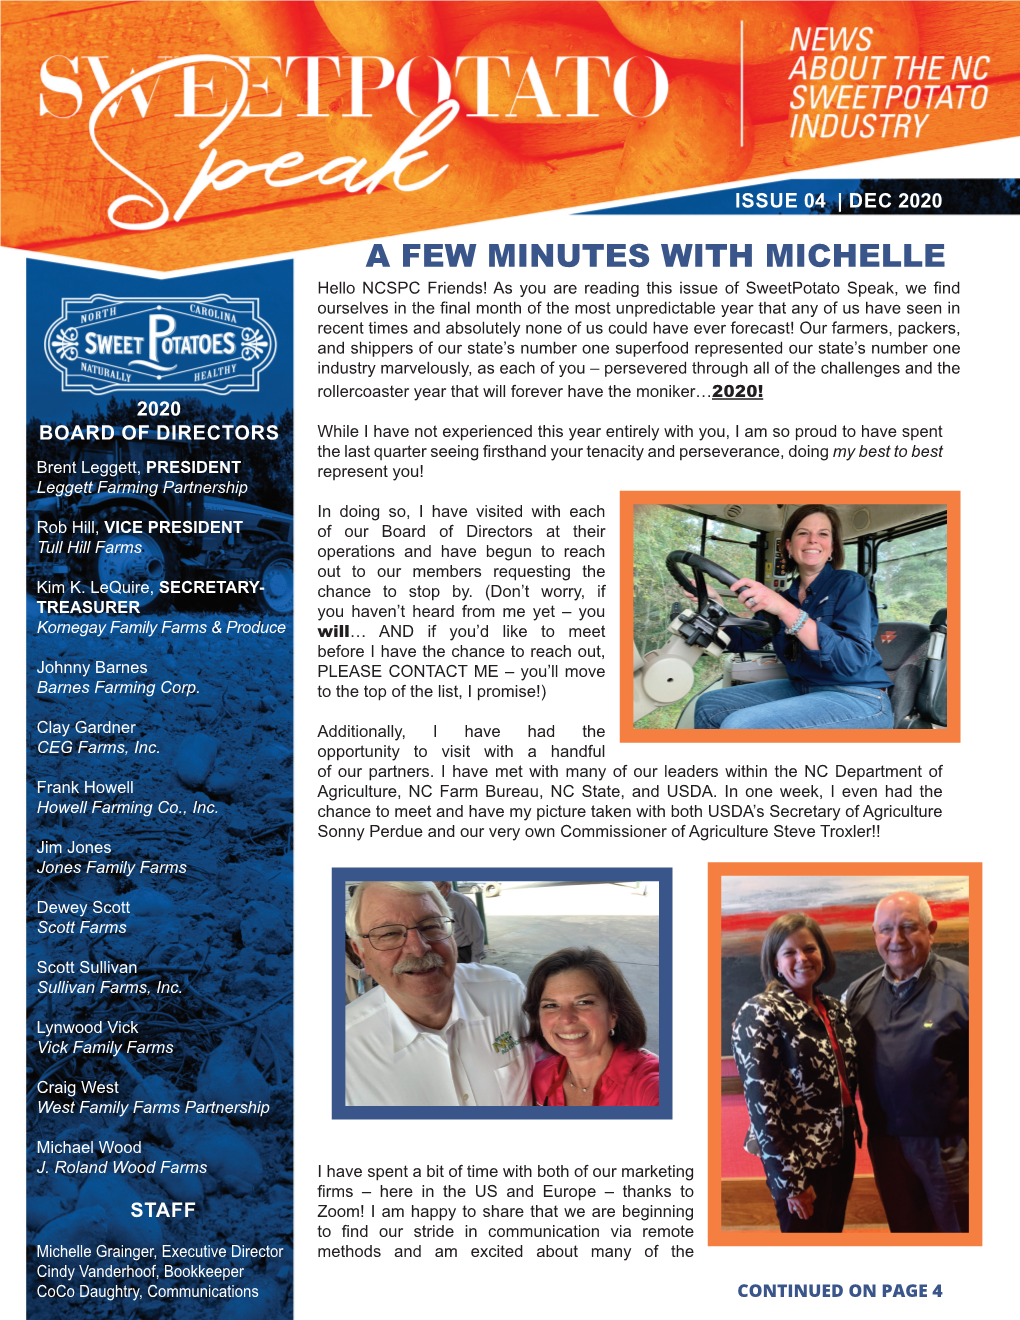 A Few Minutes with Michelle